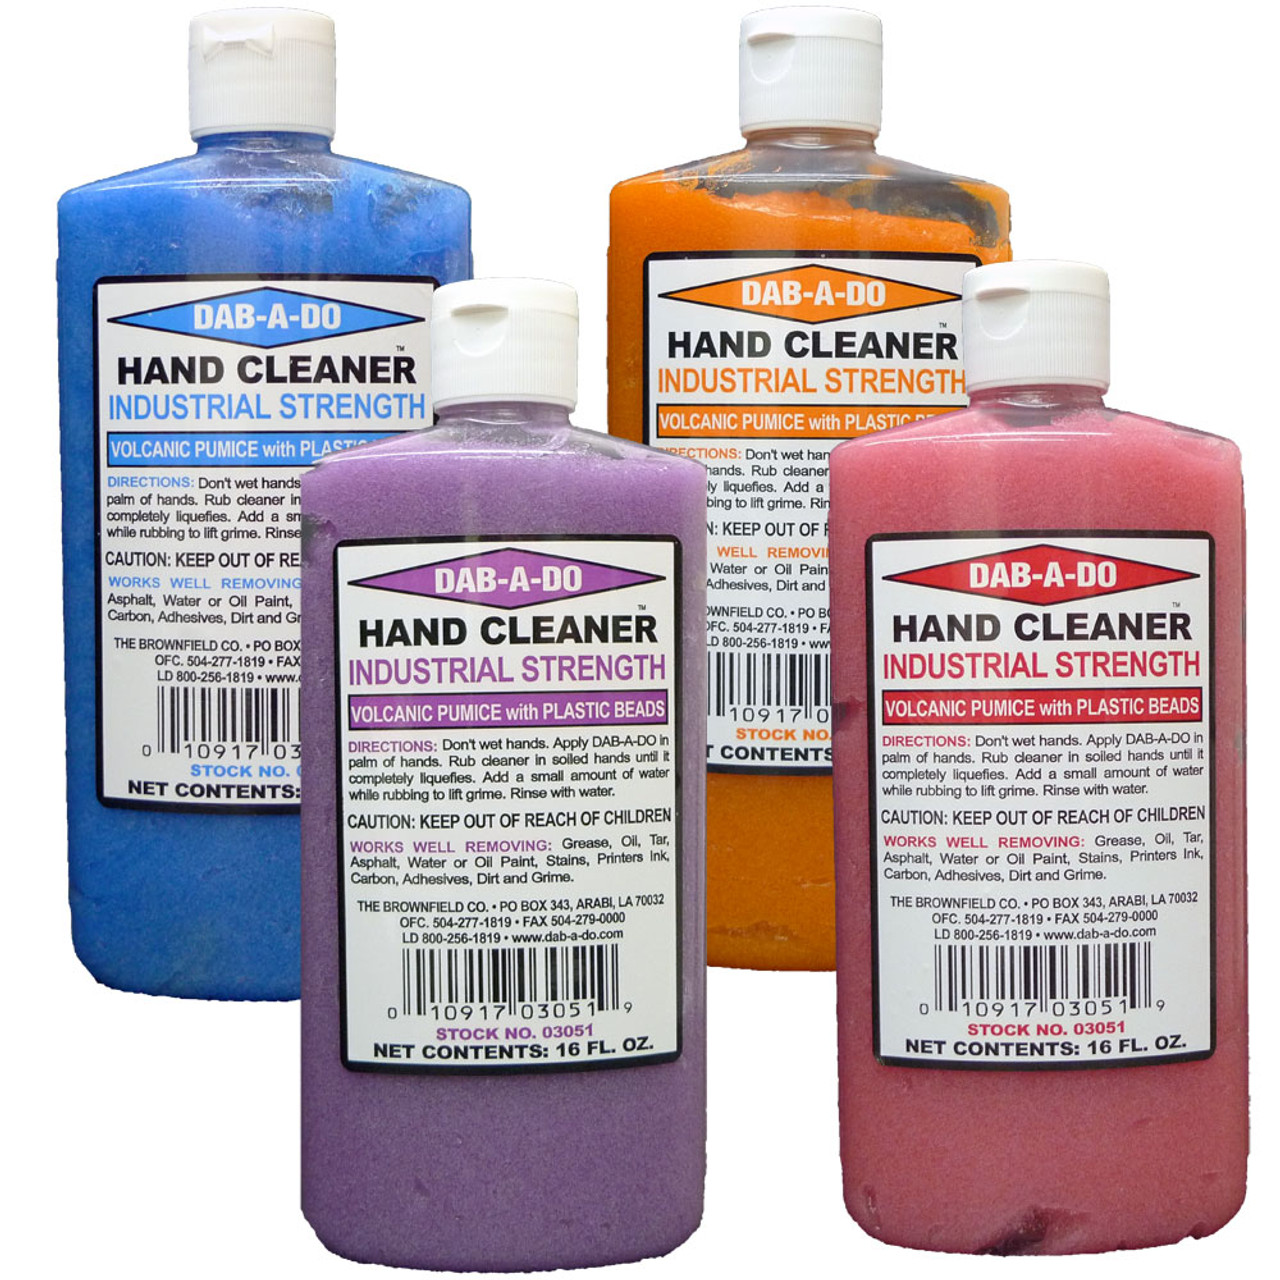 https://cdn11.bigcommerce.com/s-zu1b9cn728/images/stencil/1280x1280/products/290/672/DAB-A-DO_16_0Z_HAND_CLEANER_03051_2__44757.1617297760.jpg?c=1